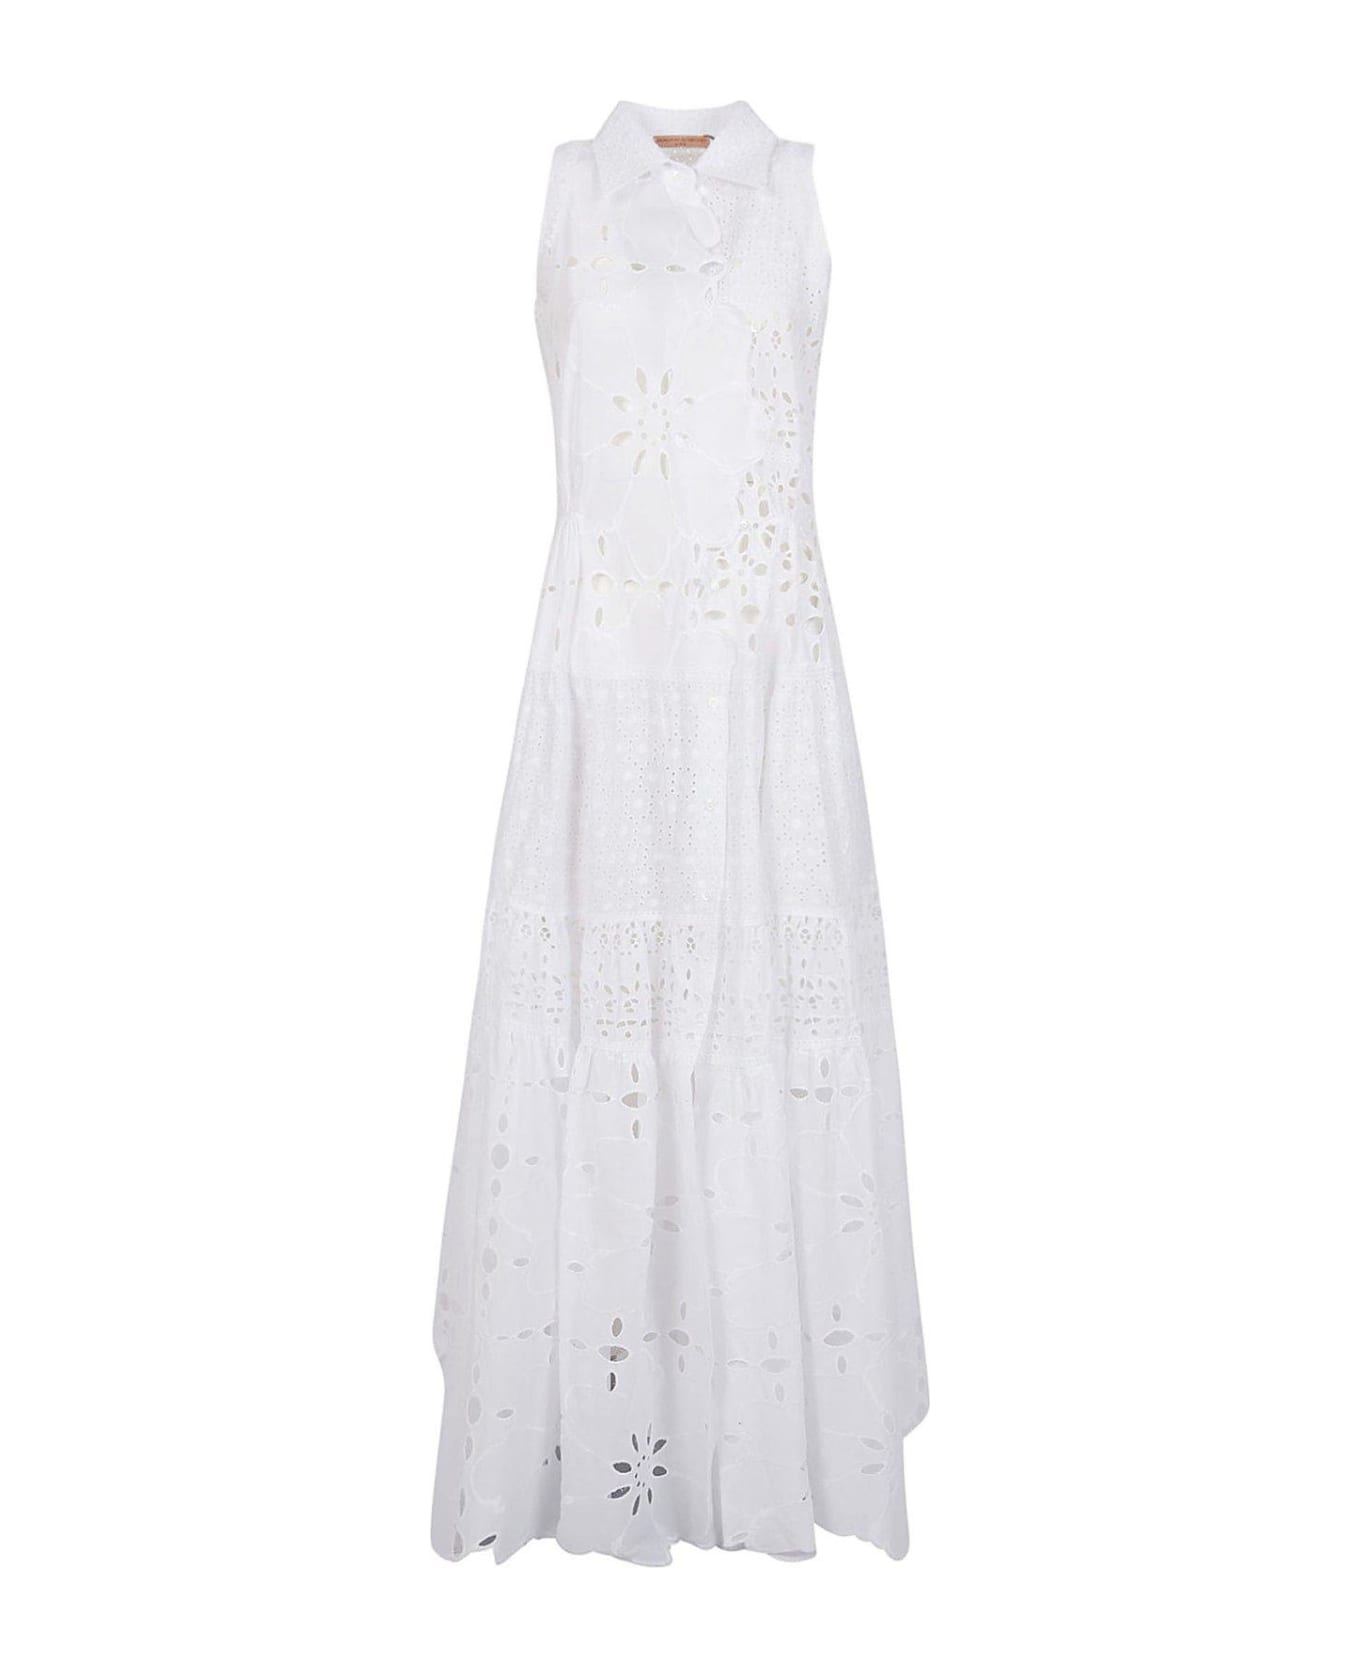 Ermanno Scervino Broderie Anglaise Long Shirtdress - Bright White